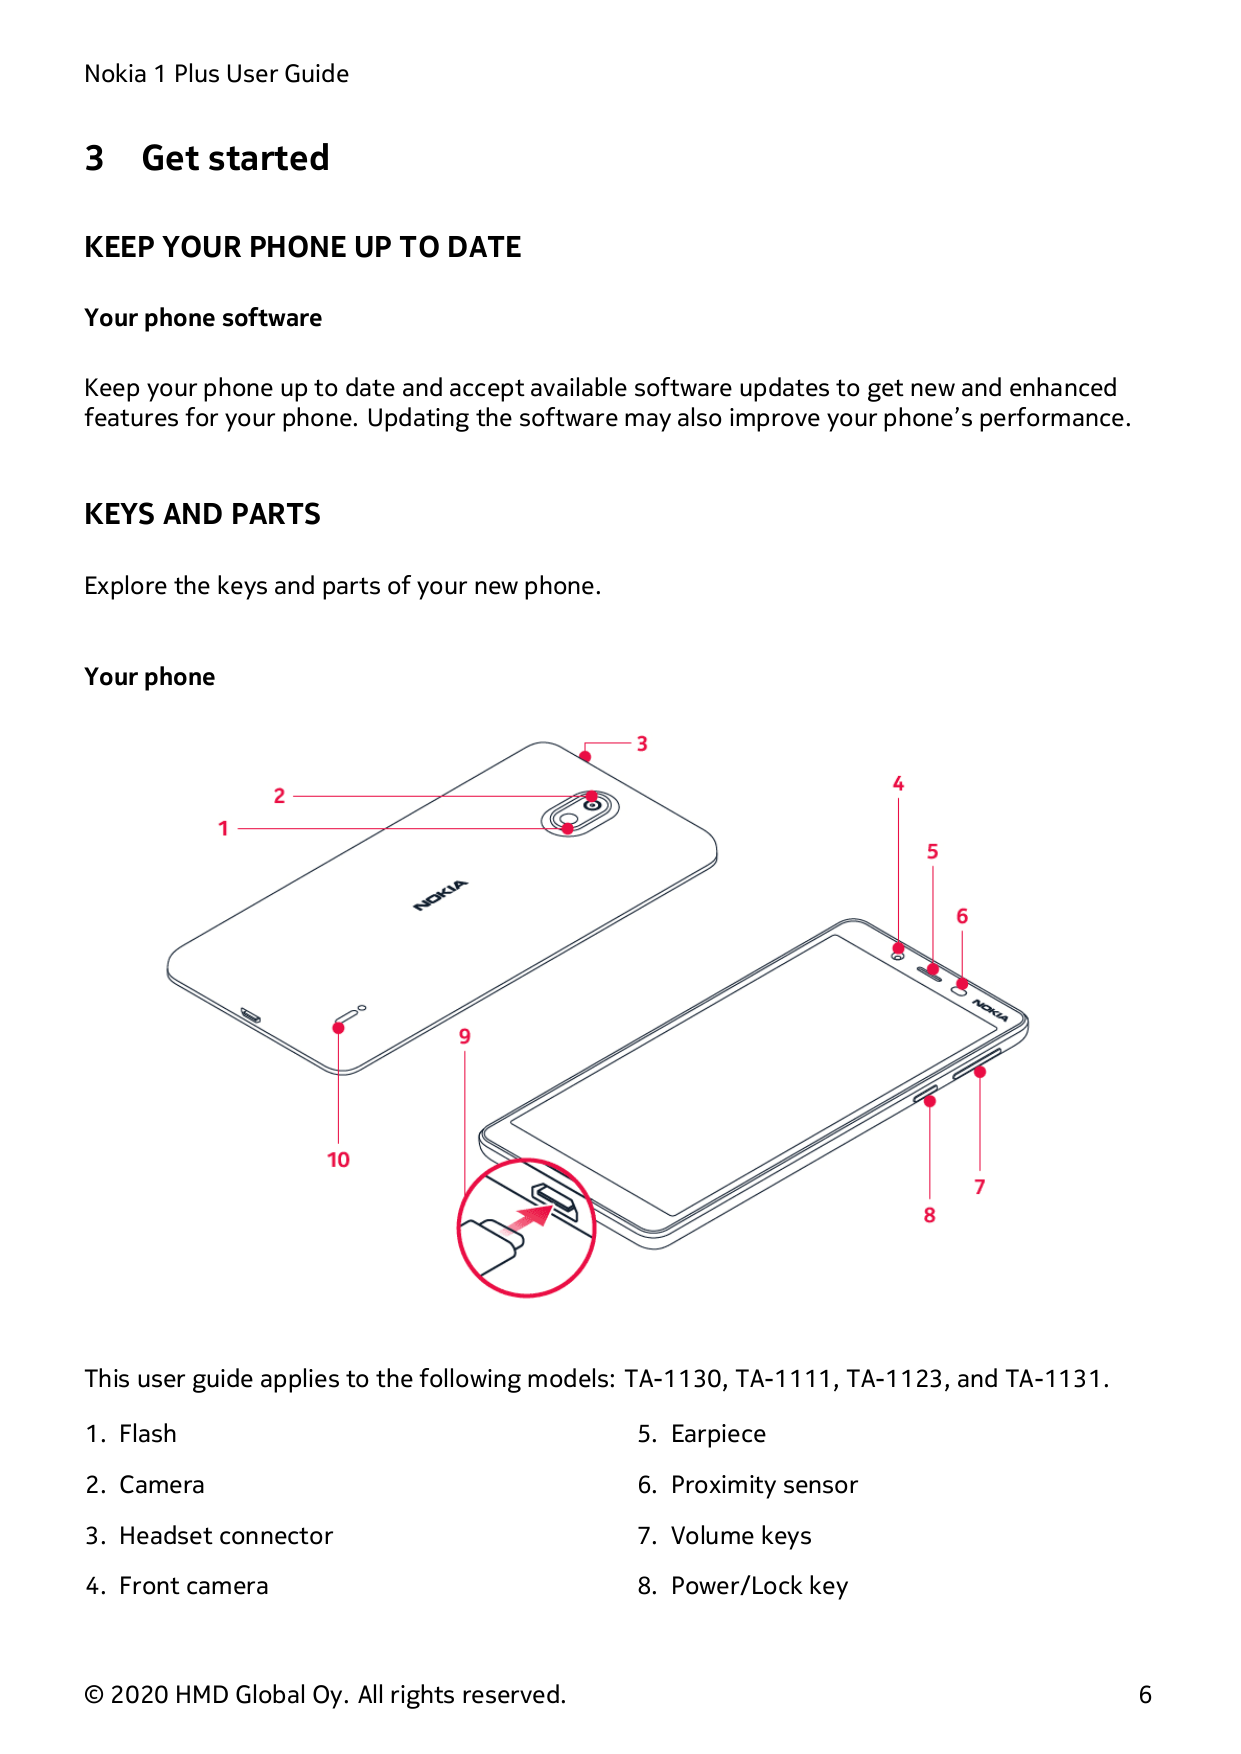 Nokia 1 Plus User Guide3Get startedKEEP YOUR PHONE UP TO DATEYour phone softwareKeep your phone up to date and accept available 